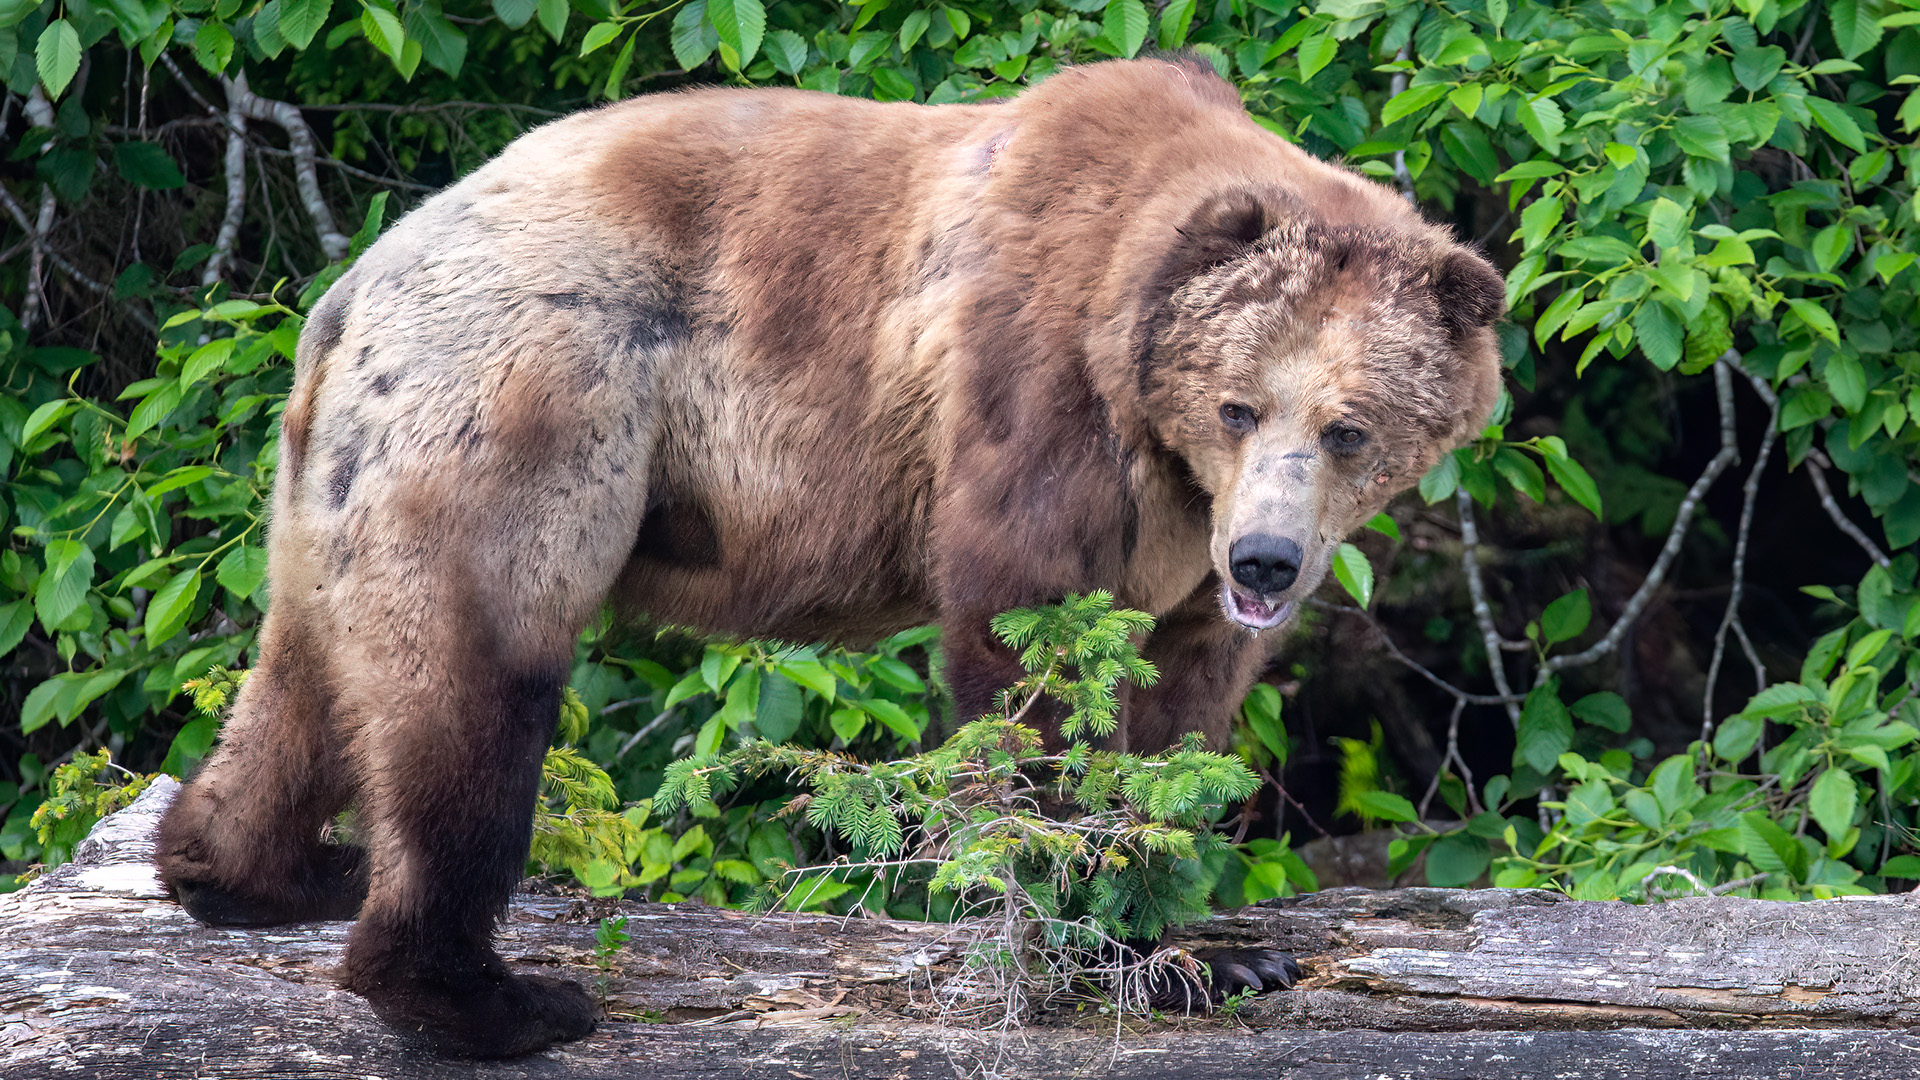 This adult male, in his late teens or possibly early 20s, bears extensive scarring across his body and is missing an ear, the result of scuffles during the breeding season while competing for or defending mating opportunities.